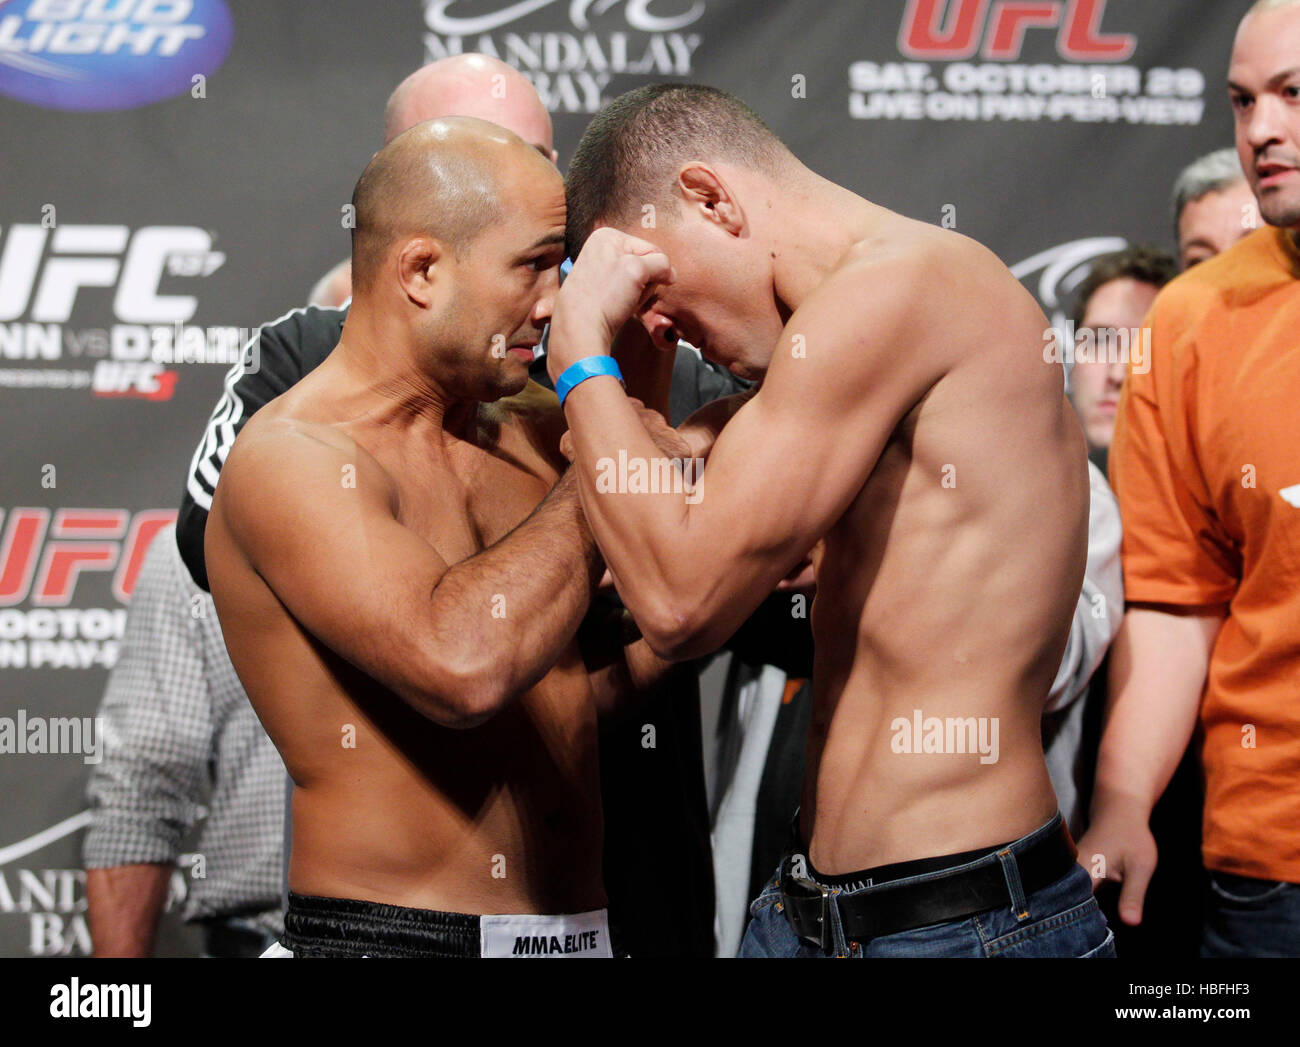 UFC fighters Nick Diaz, right, and BJ Penn, left, square off ...